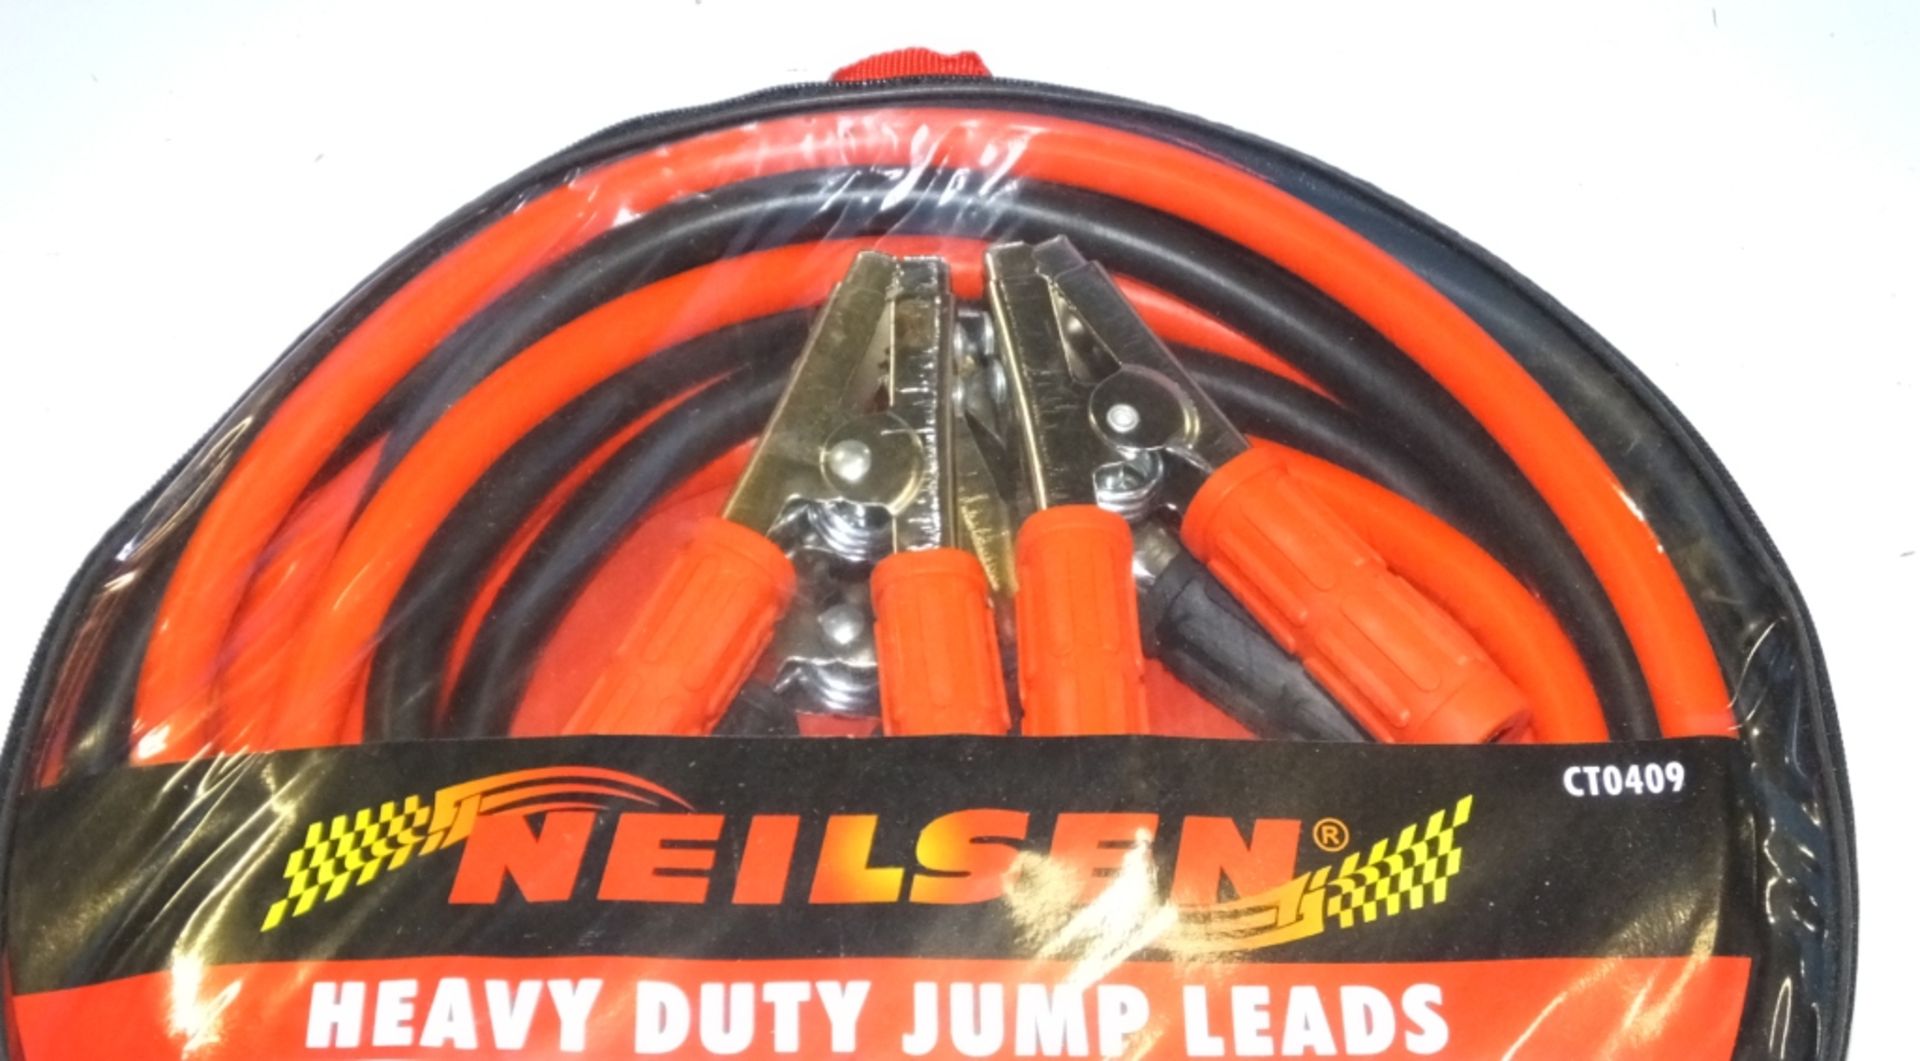 Neilsen CT0409 Heavy duty jump leads - 800amp x 6M - Image 2 of 3